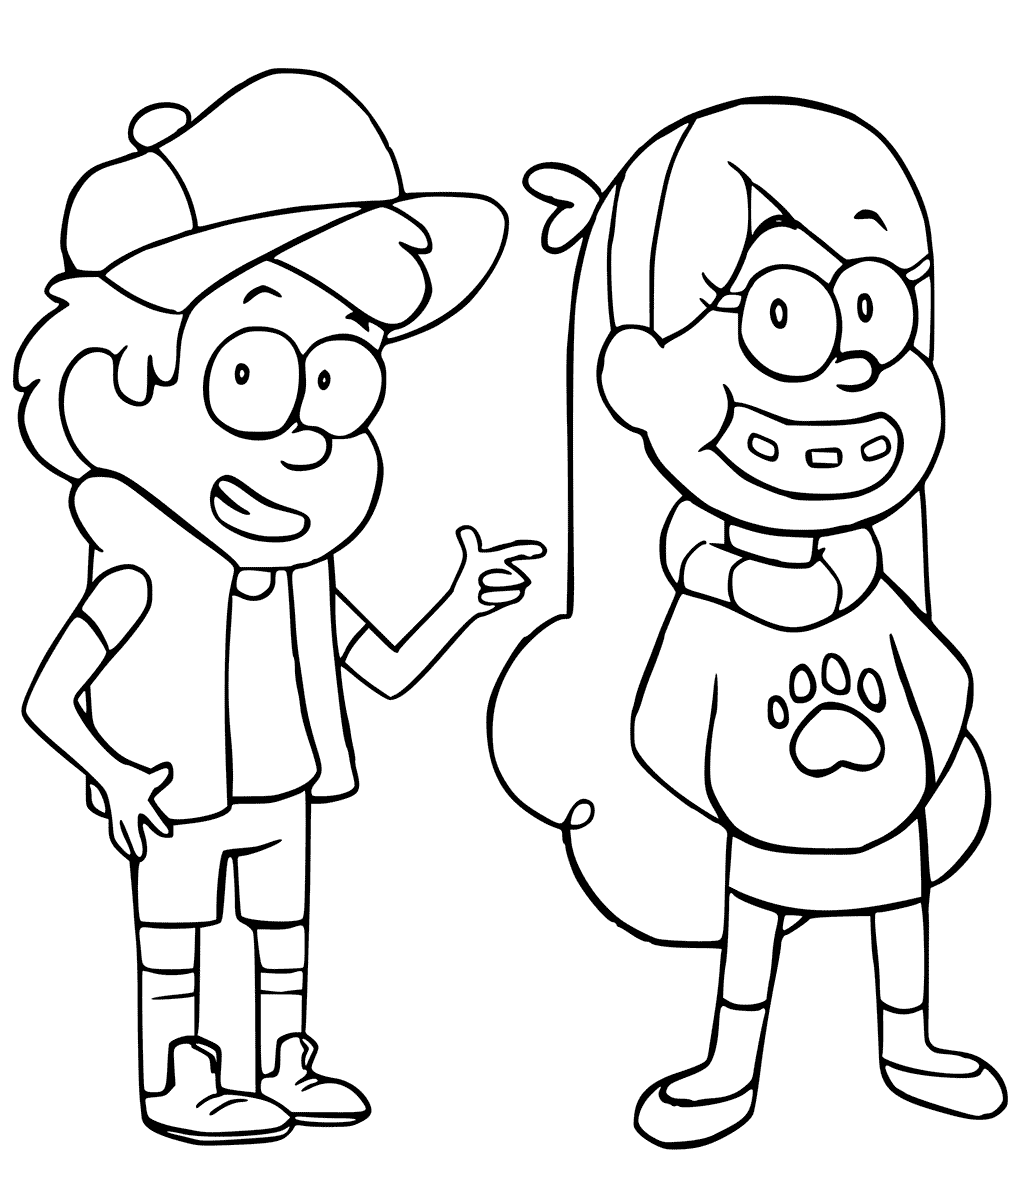 Gravity Falls Coloring Pages Best Coloring Pages For Kids